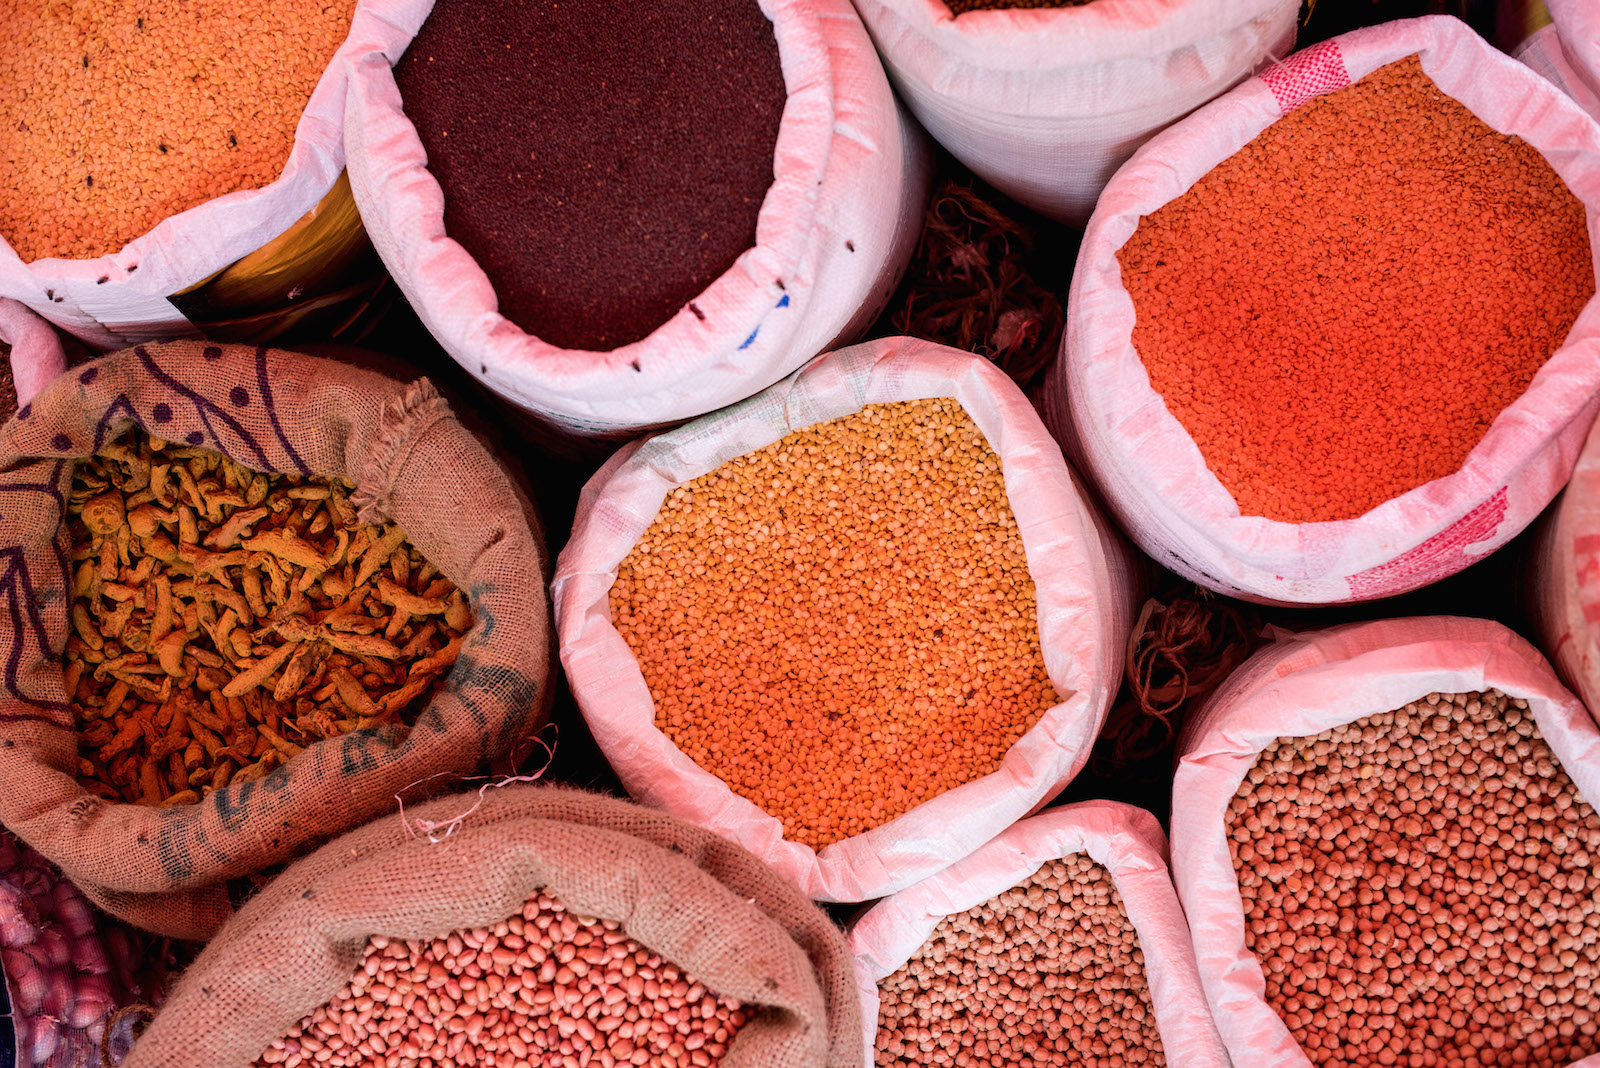 Spices at Weligama market